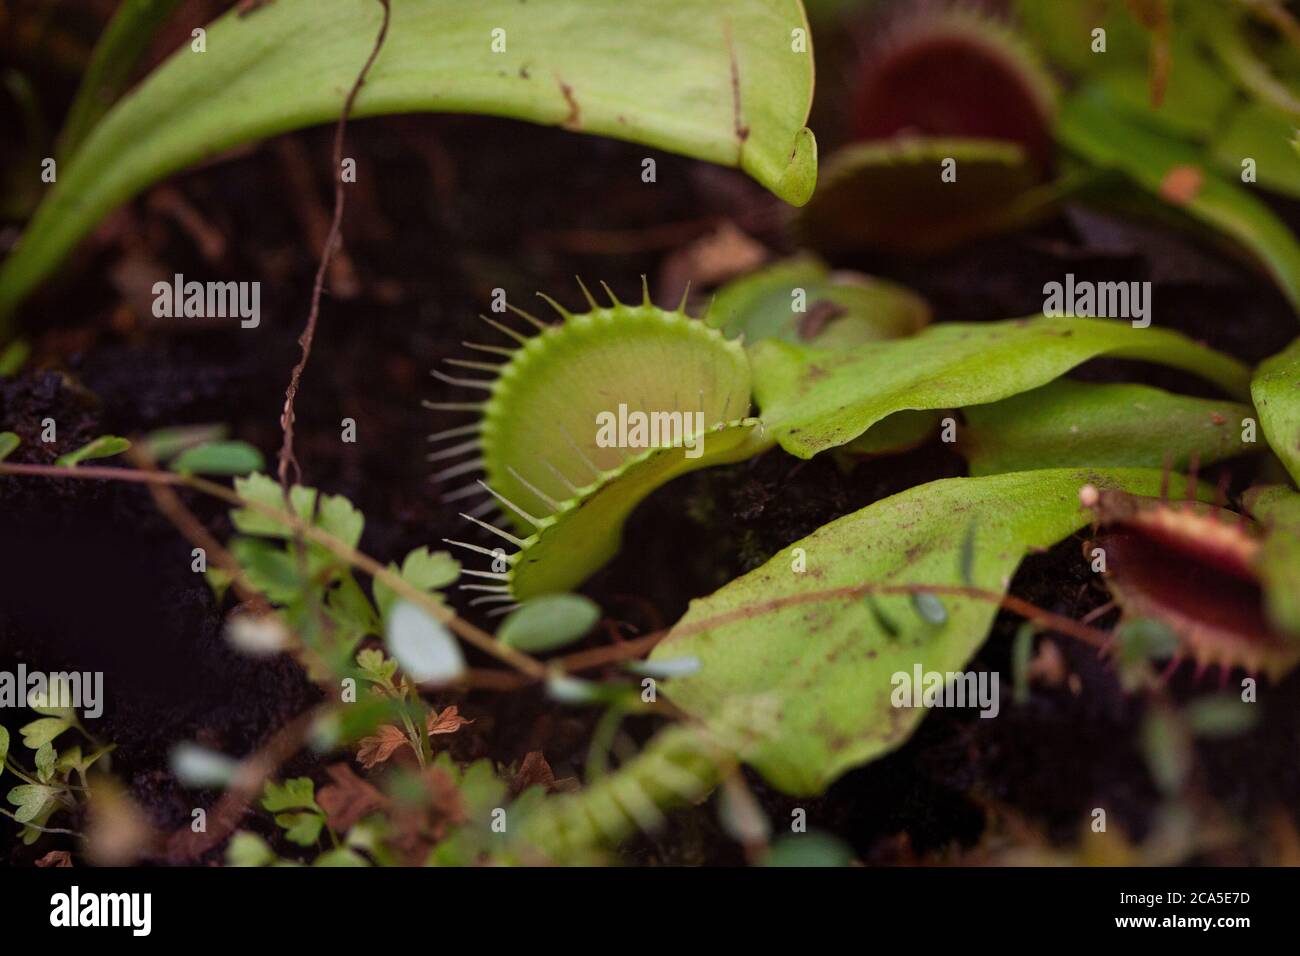 Venus flytrap - in latin Dionaea muscipula, is a meat eating or carnivorous plant and use rapid leaf movements to actively ensnare insects. Stock Photo